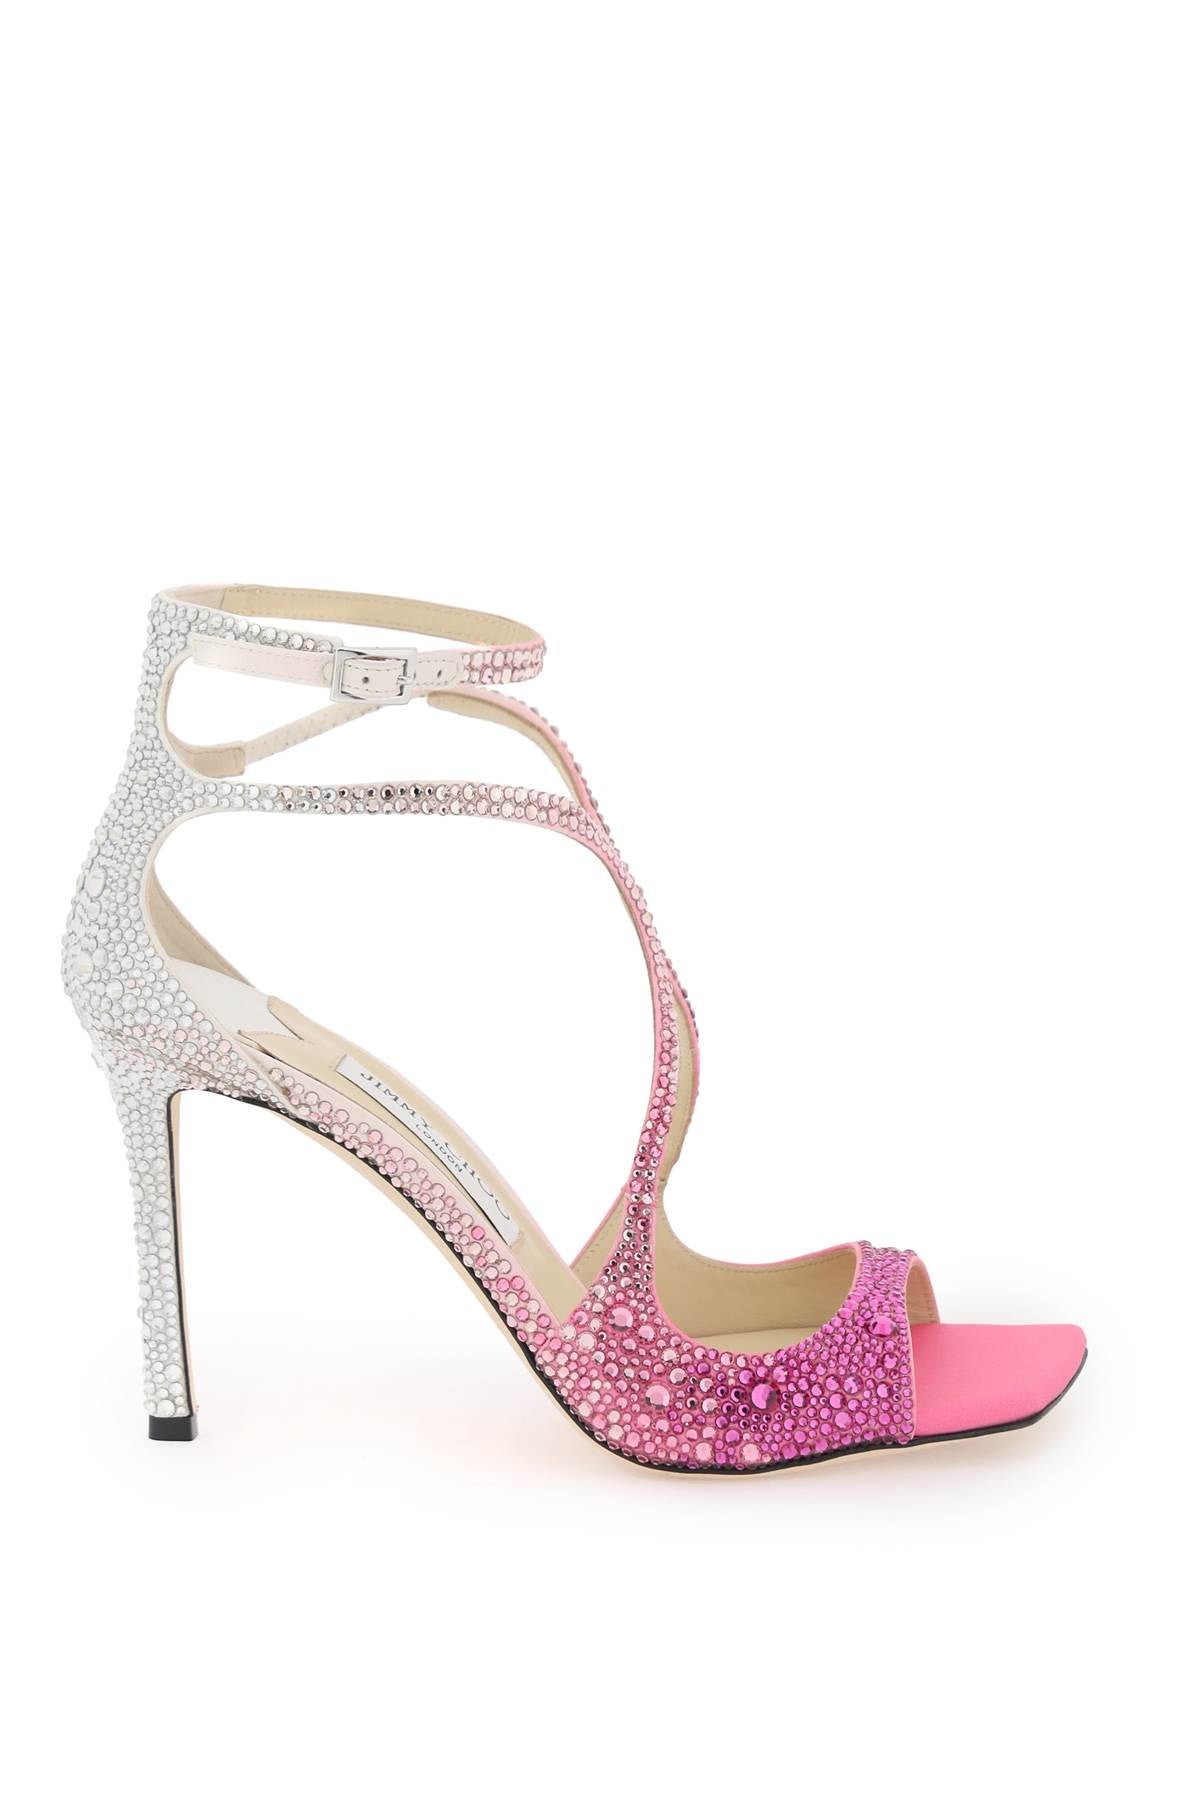 Jimmy Choo Azia 95 Pumps With Crystals Women